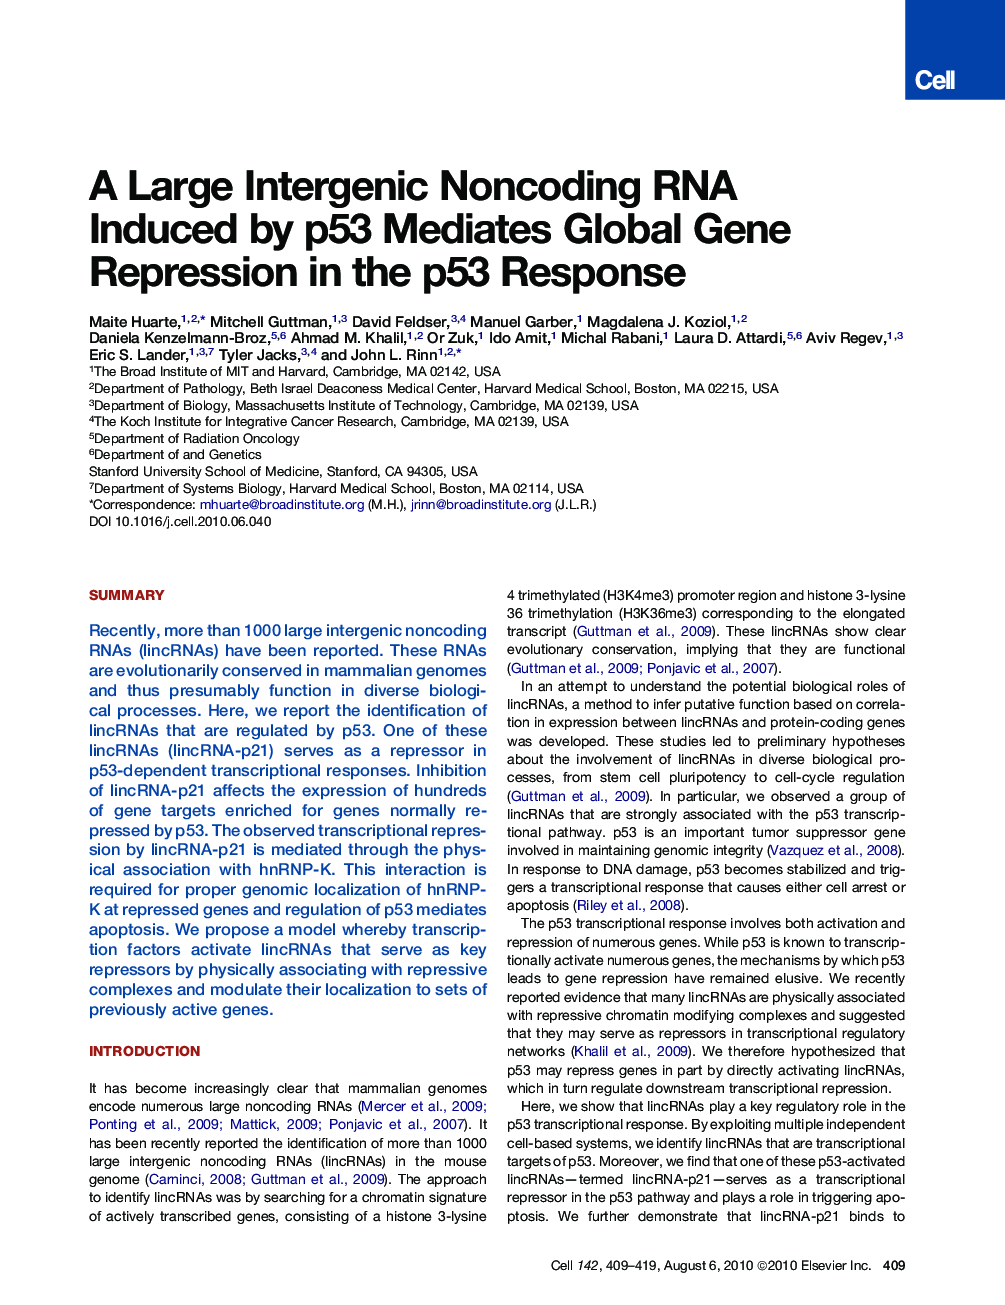 A Large Intergenic Noncoding RNA Induced by p53 Mediates Global Gene Repression in the p53 Response